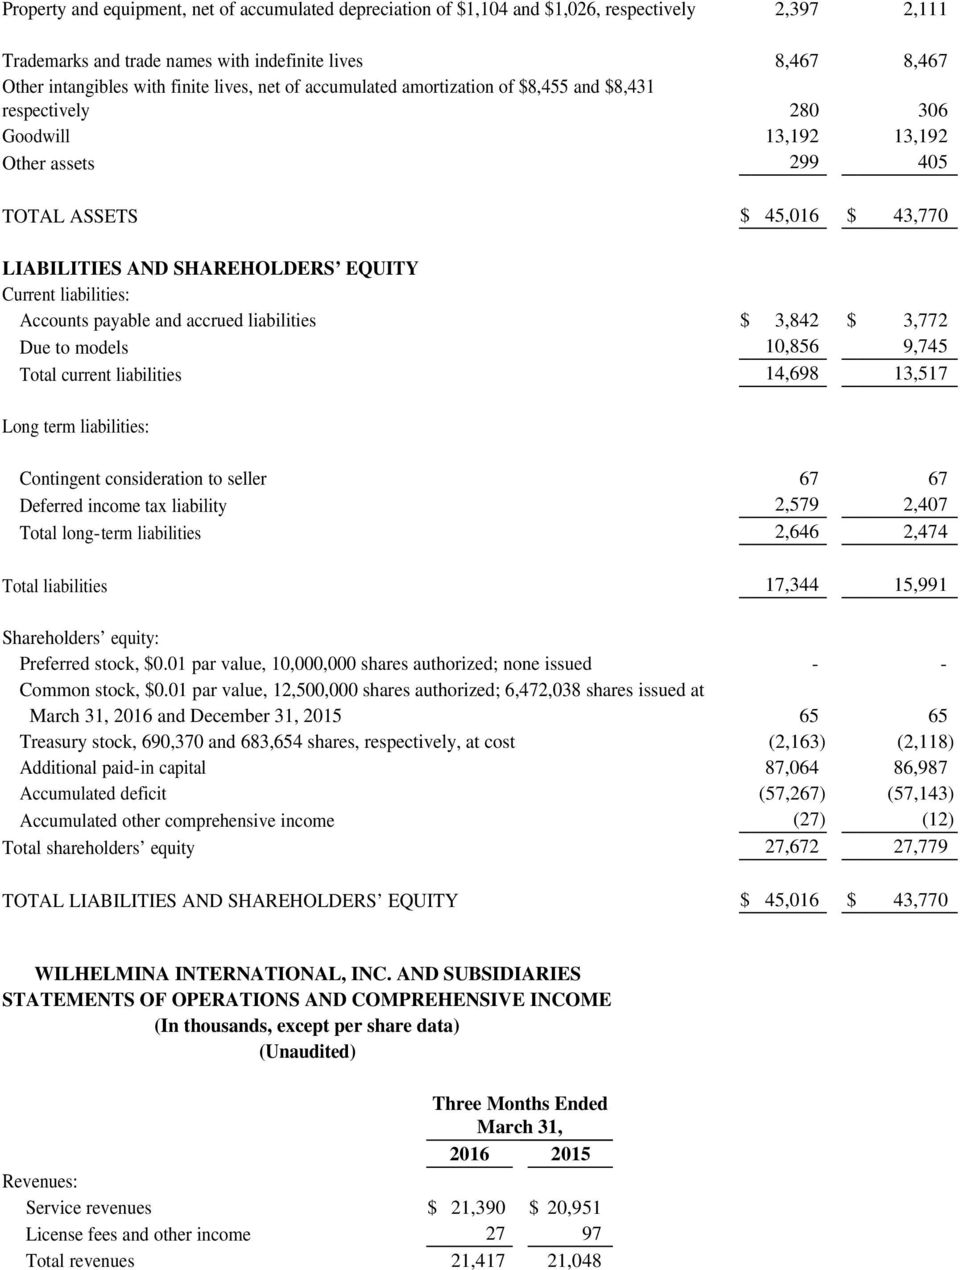 liabilities: Accounts payable and accrued liabilities $ 3,842 $ 3,772 Due to models 10,856 9,745 Total current liabilities 14,698 13,517 Long term liabilities: Contingent consideration to seller 67